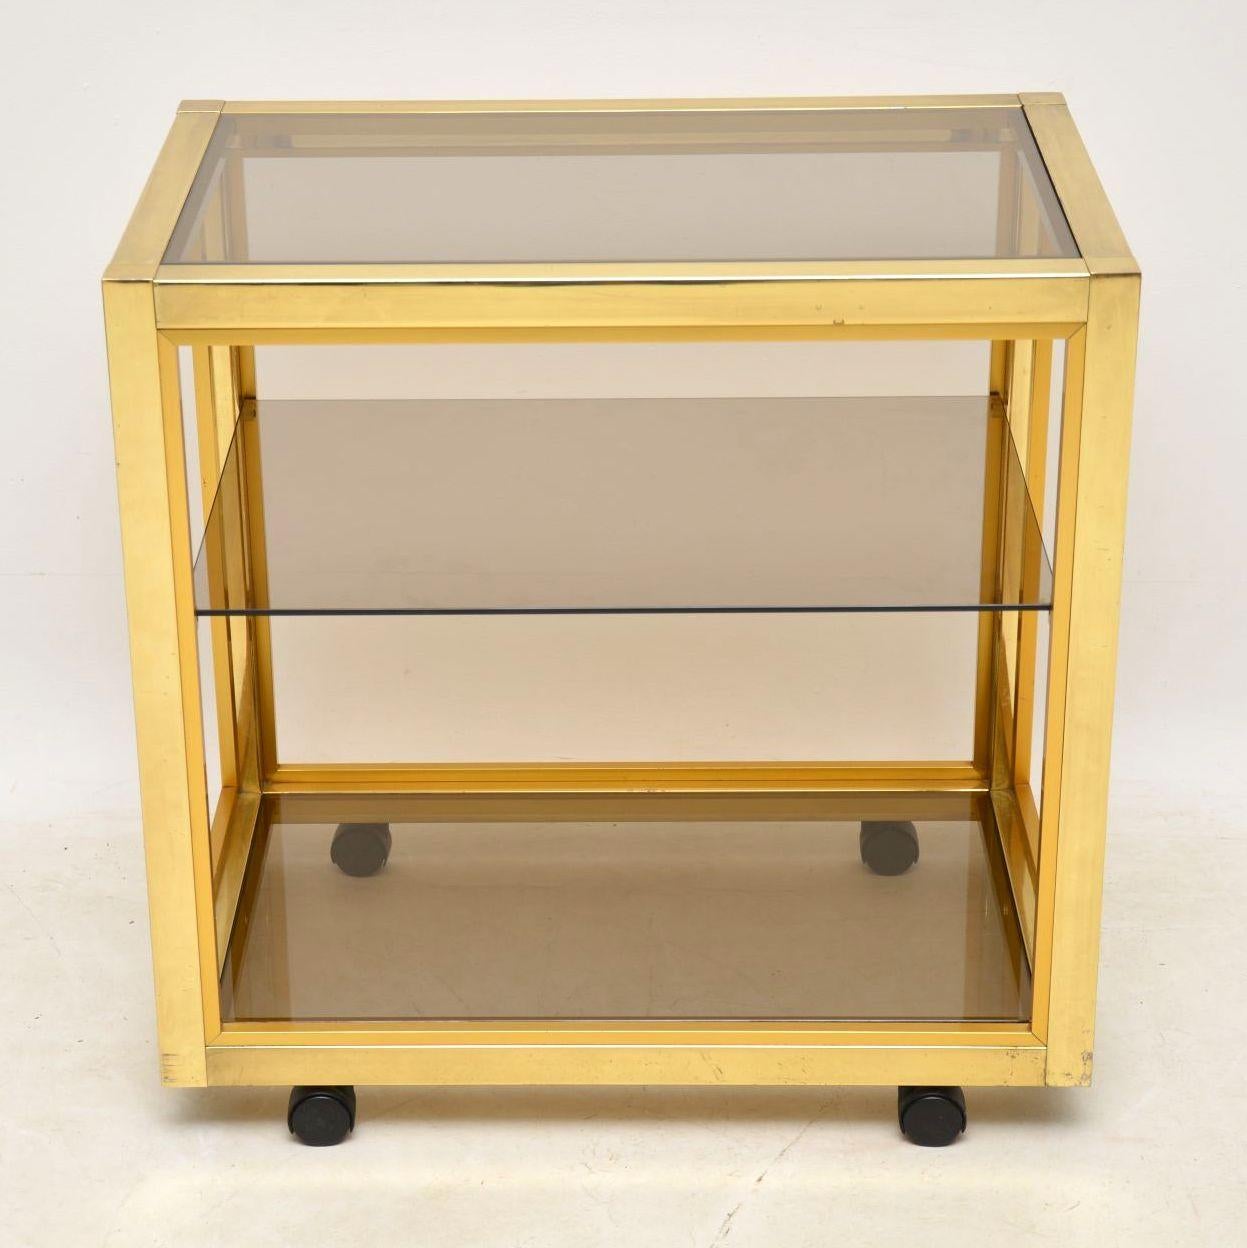 A beautiful and rare vintage Italian drinks trolley, this was made by Zevi in the 1970s. It’s made from brass plated aluminium, with removable glass shelves. The condition is excellent for its age, with only some extremely minor wear here and there.